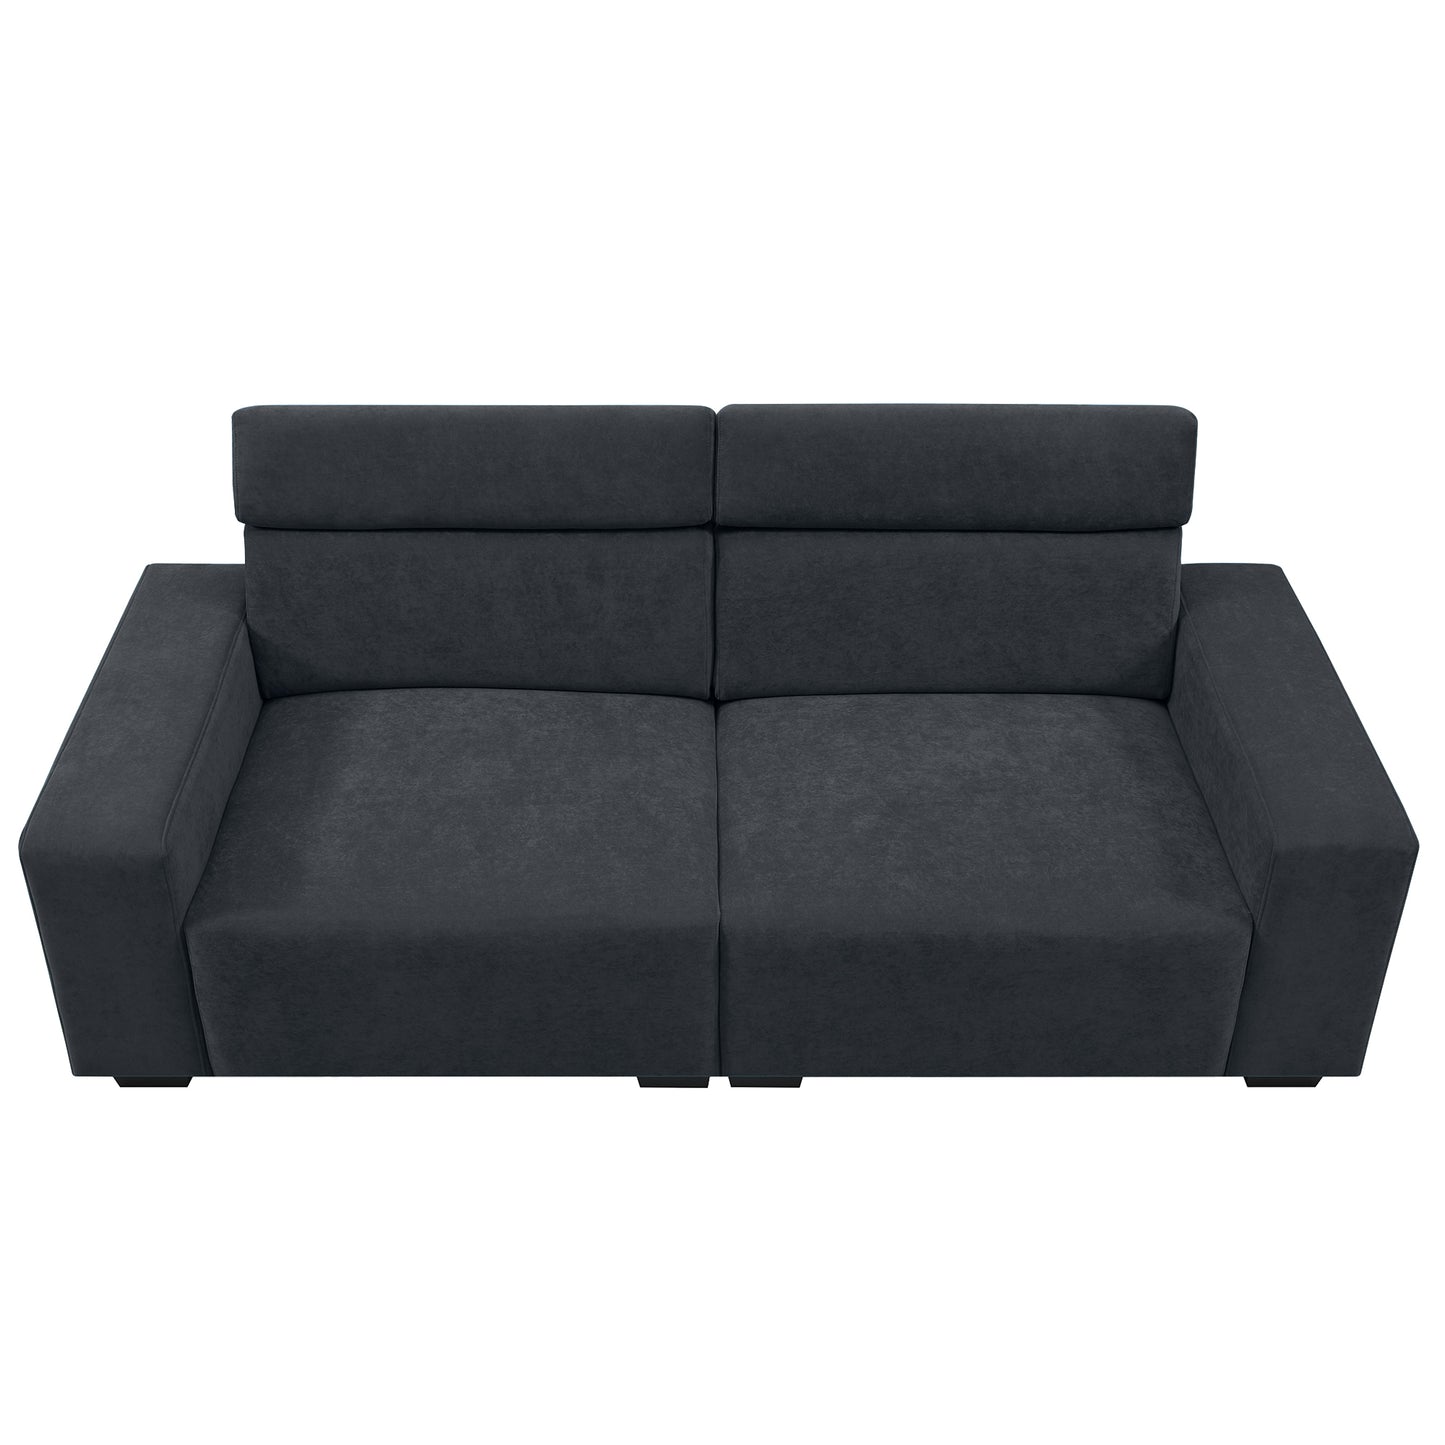 [VIDEO provided] [New] 87*34.2'' 2-3 Seater Sectional Sofa Couch with Multi-Angle Adjustable Headrest,Spacious and Comfortable Velvet Loveseat for Living Room,Studios,Salon,Apartment, Office,3 Colors